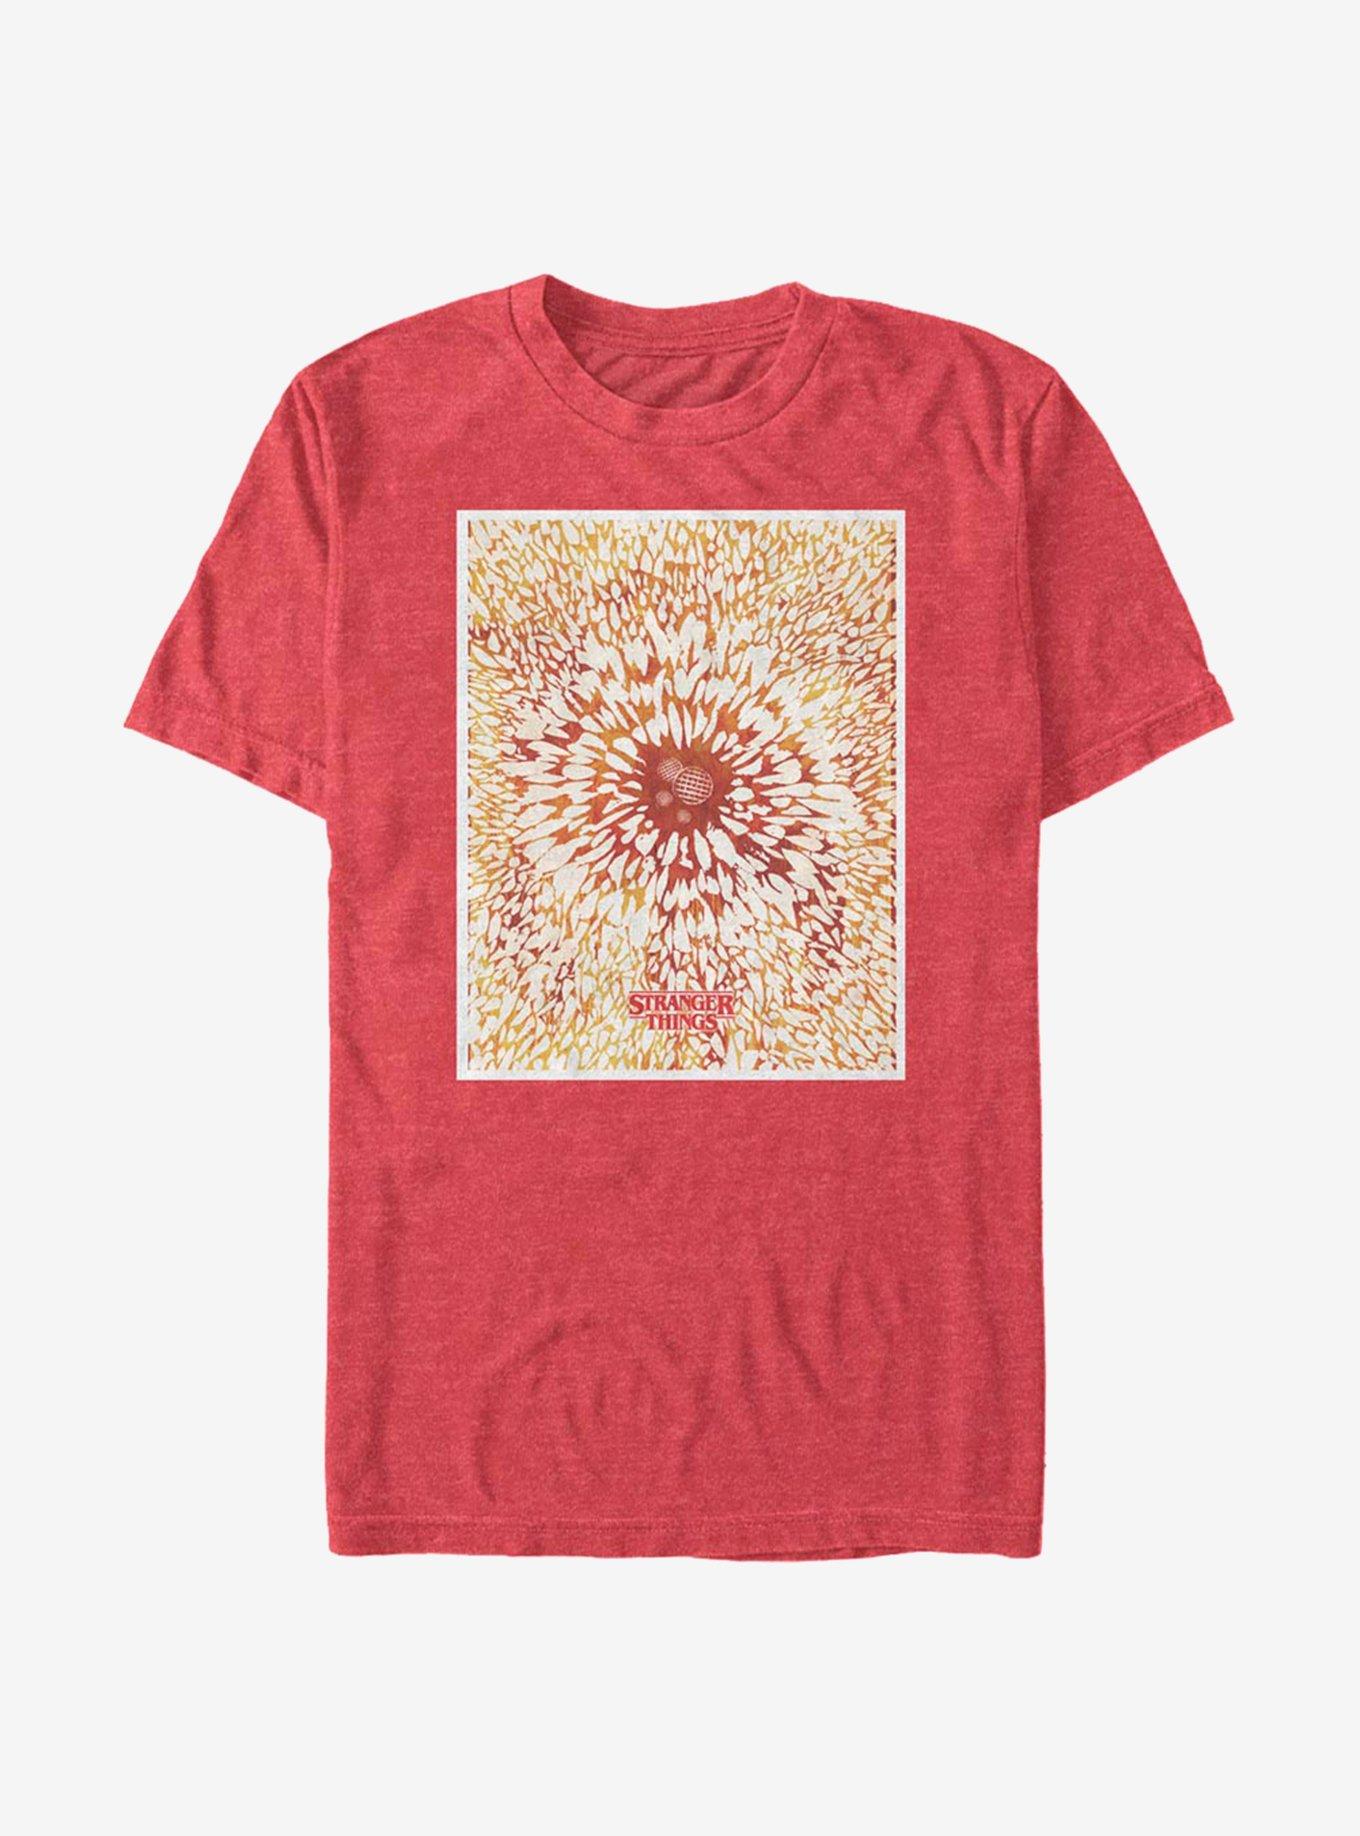 Stranger Things Waffle Poster T-Shirt, RED HTR, hi-res